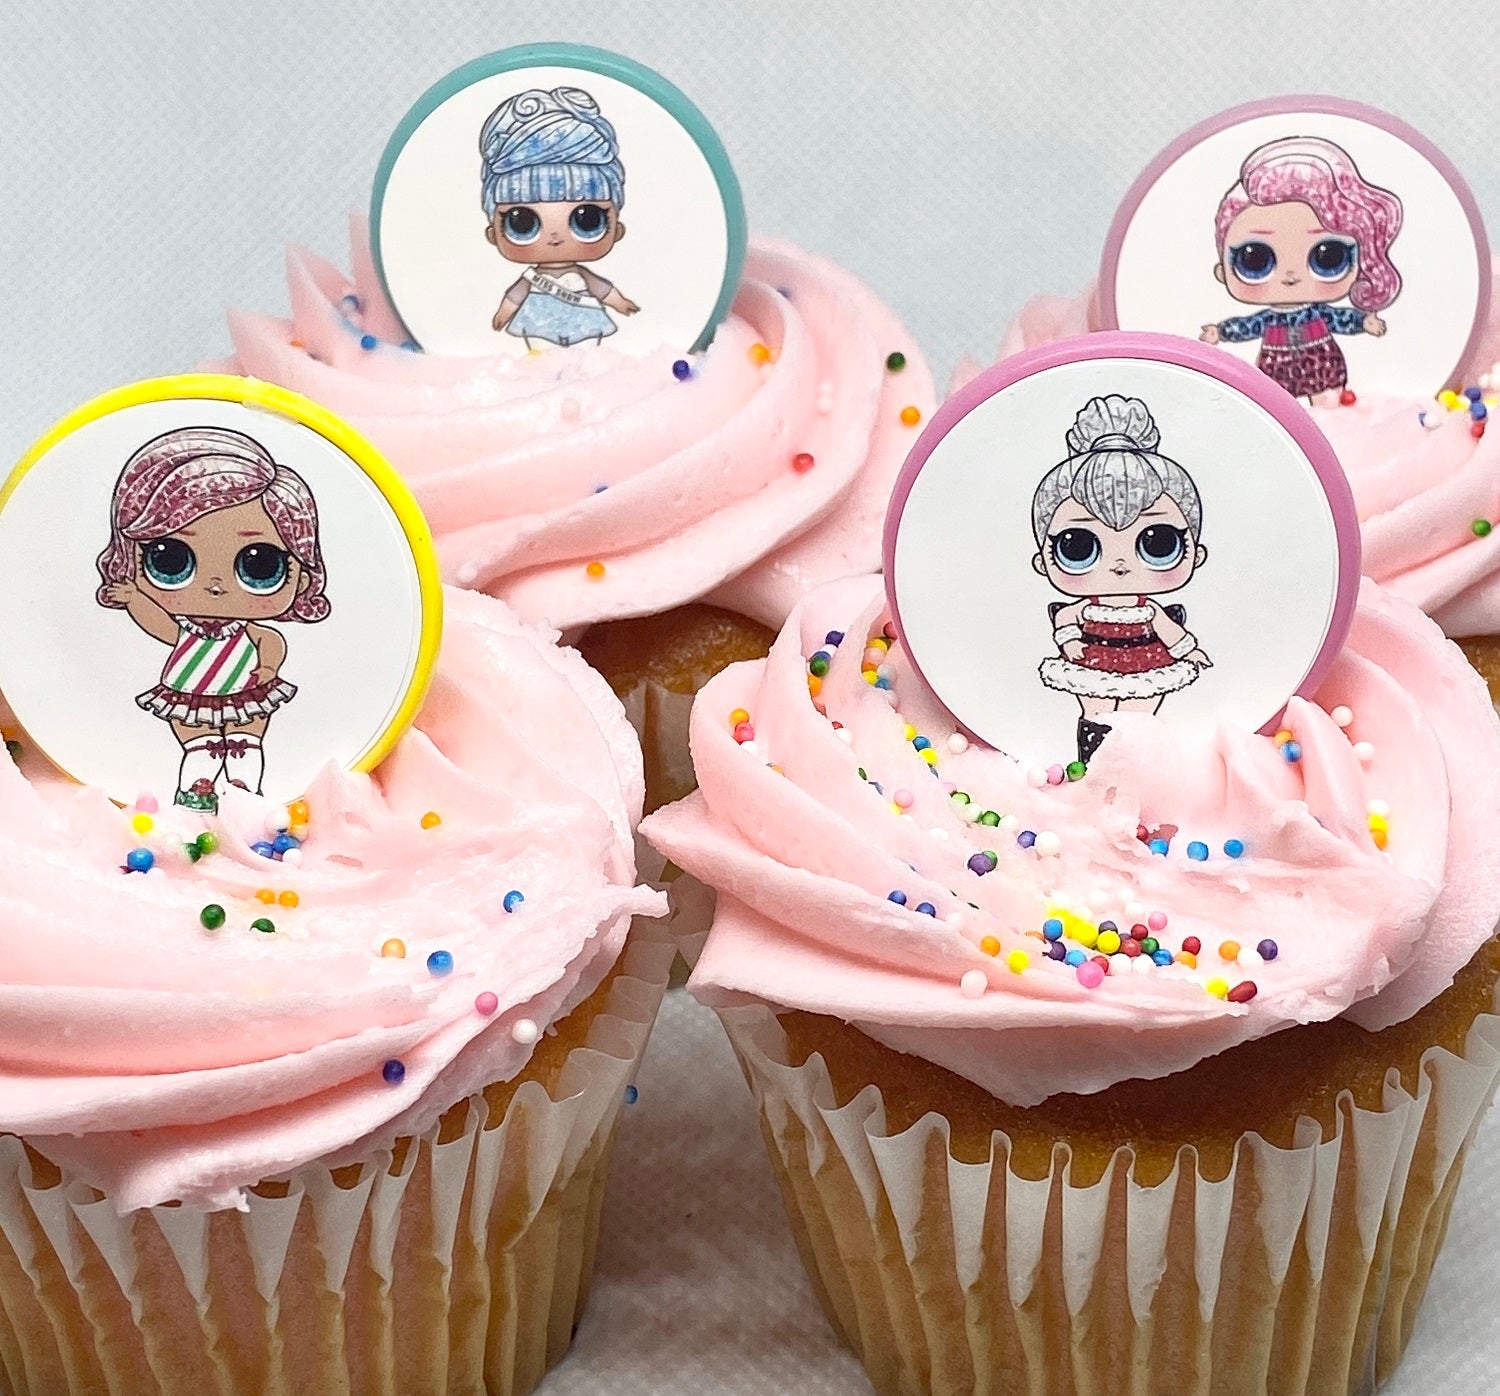 LOL Surprise Glitter Cupcake Toppers Cake Decorations Party Favors from  Blue Fox Baking